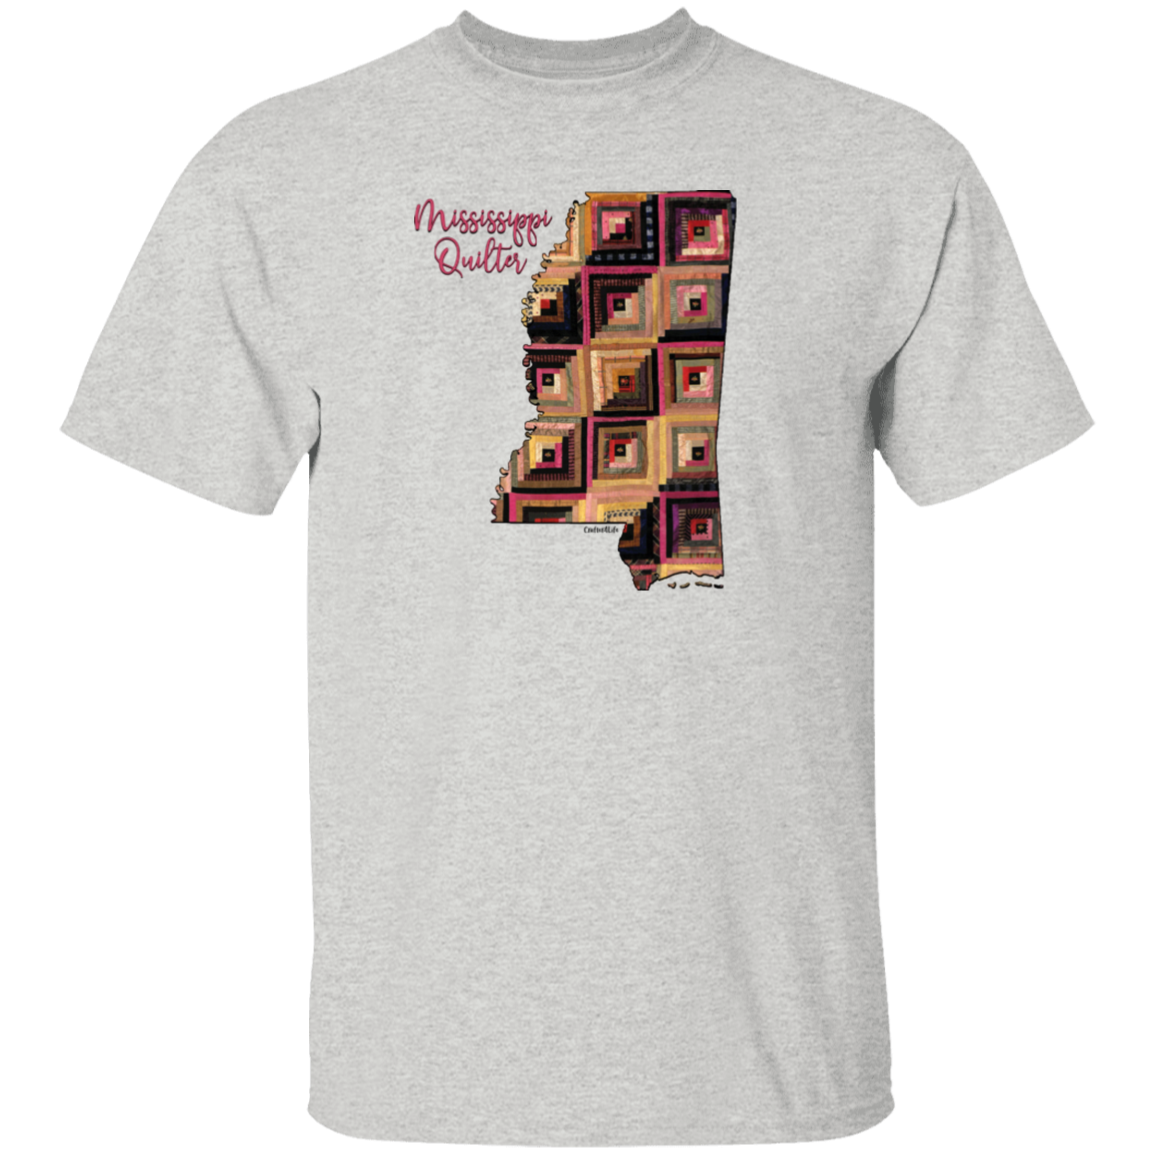 Mississippi Quilter T-Shirt, Gift for Quilting Friends and Family